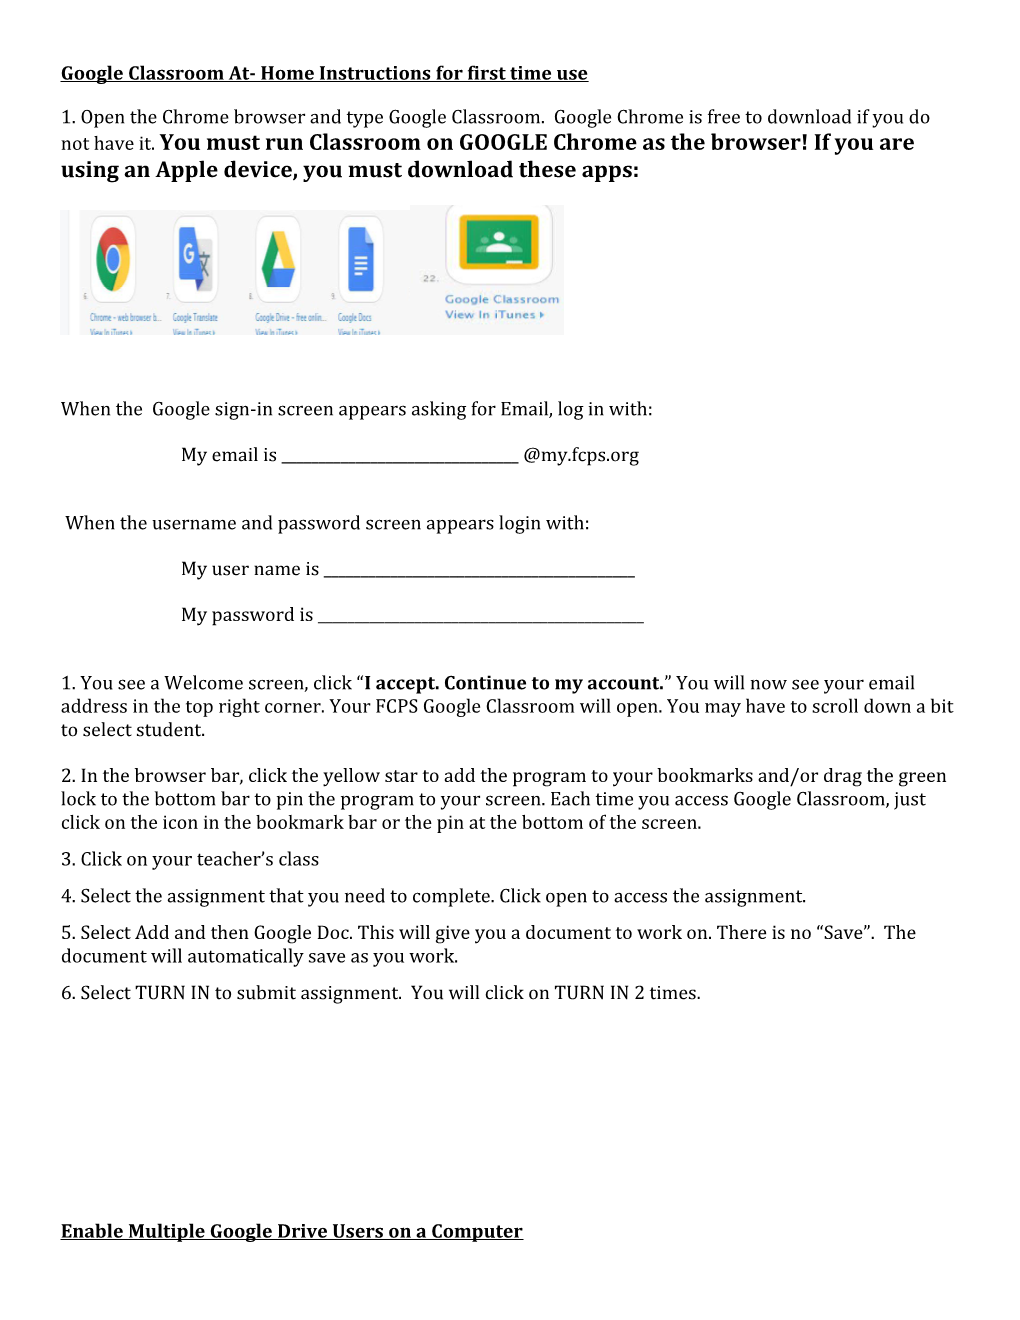 Google Classroom At- Home Instructions for First Time Use